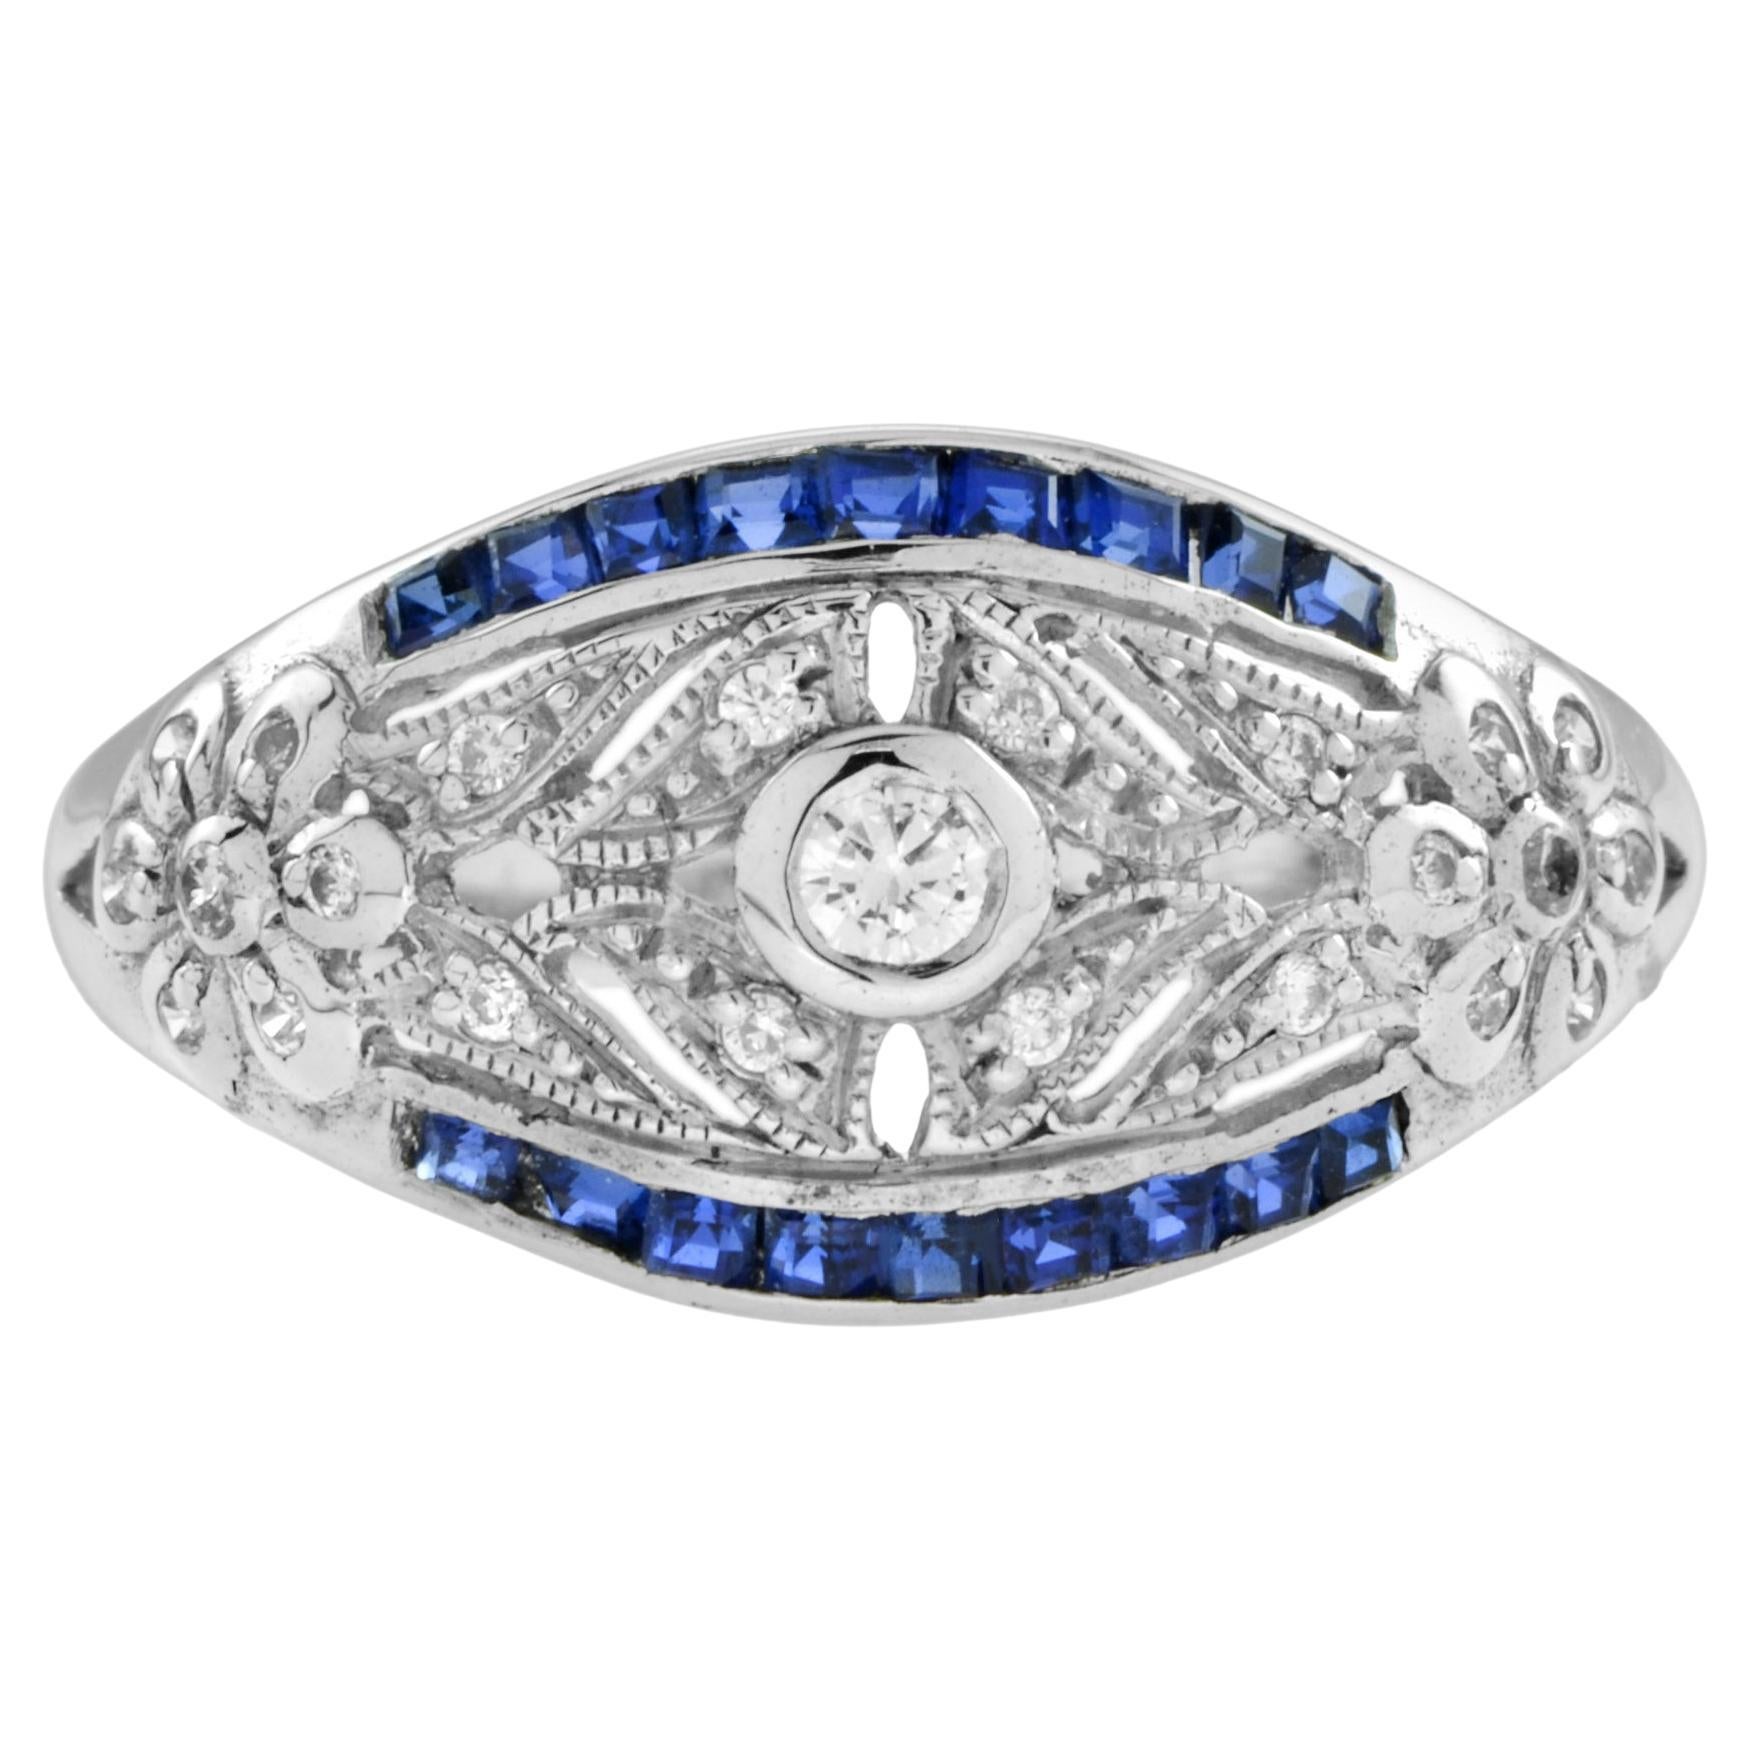 Art Deco Style Diamond and Sapphire Ring in 14K White Gold